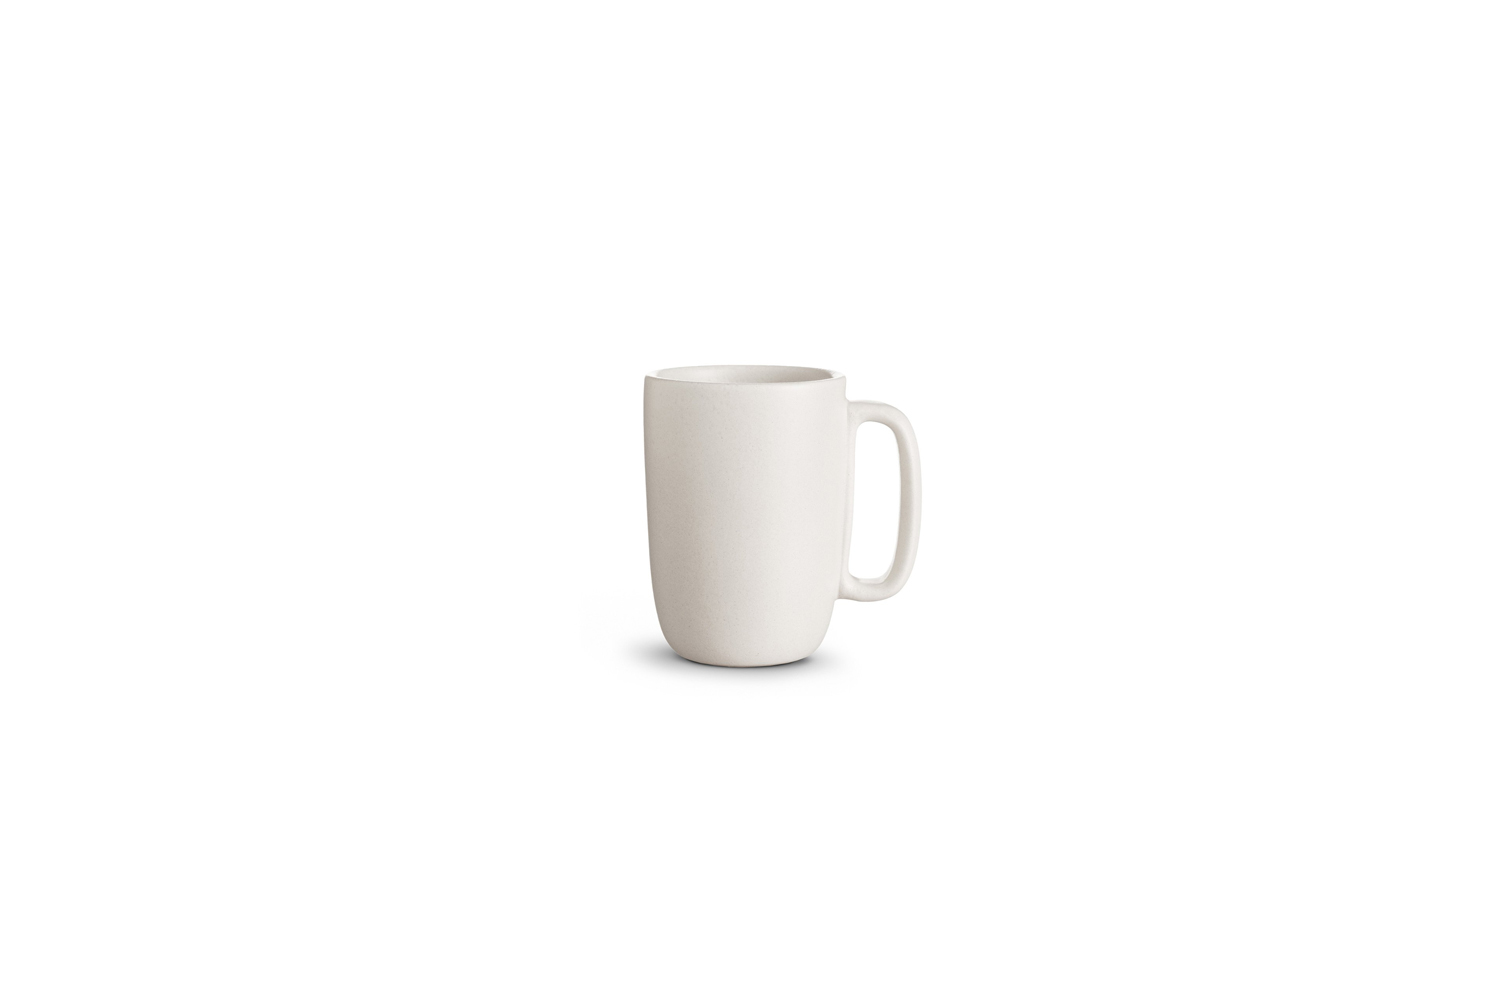 from the chez panisse line by heath ceramics, the large mug is $41. 9